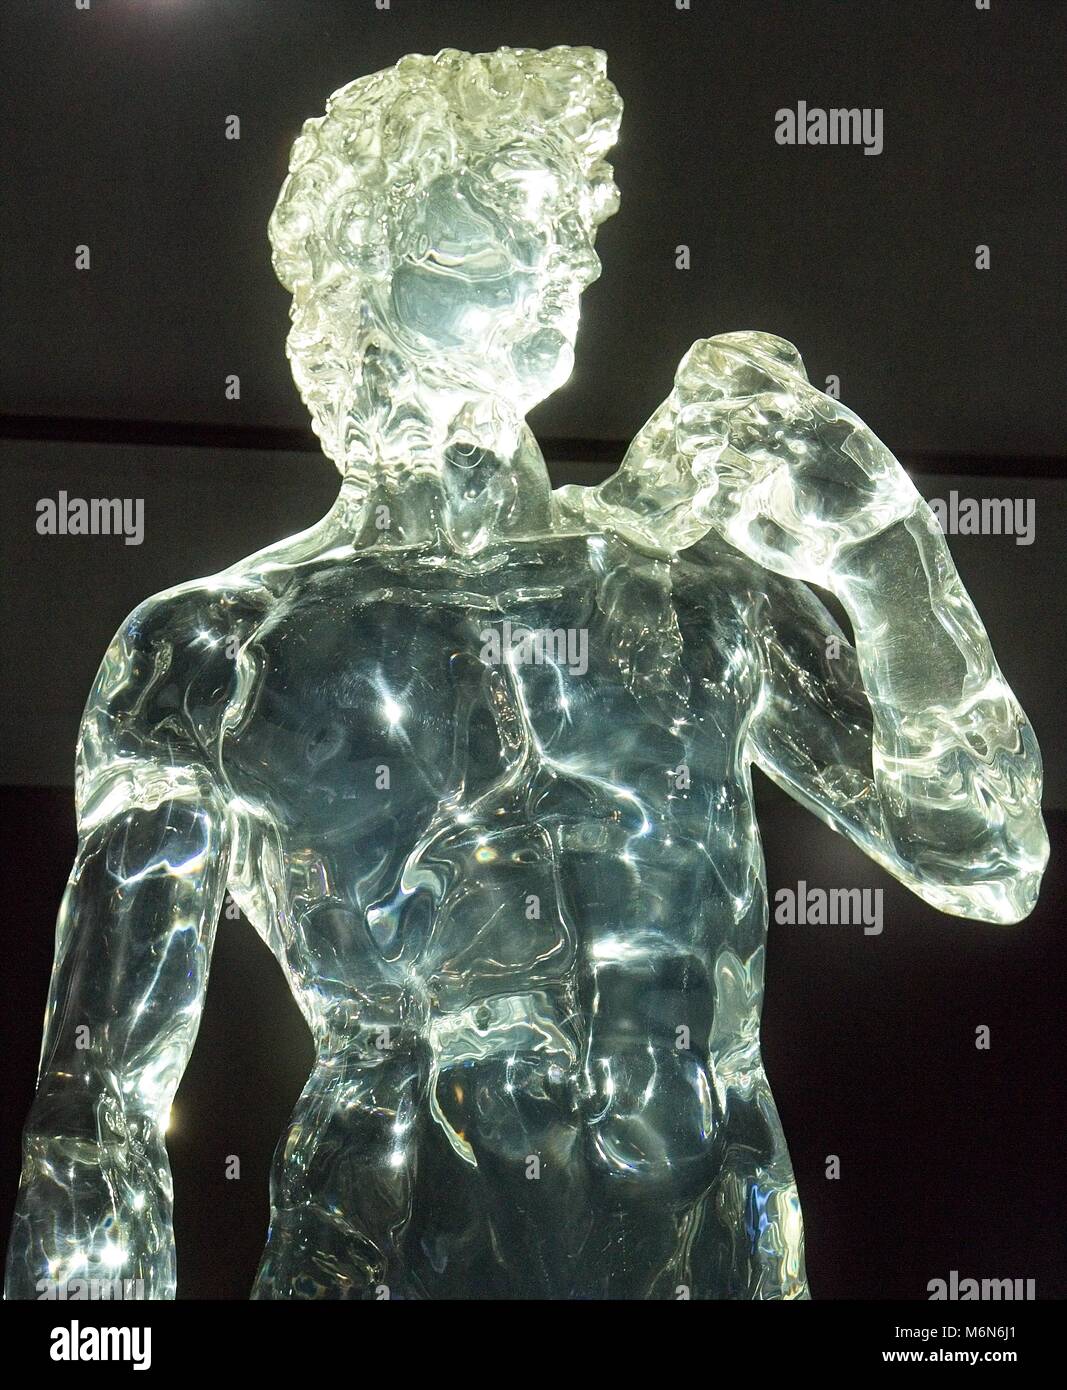 David's sculpture made from glass. Reflection in whole sculpture Stock Photo